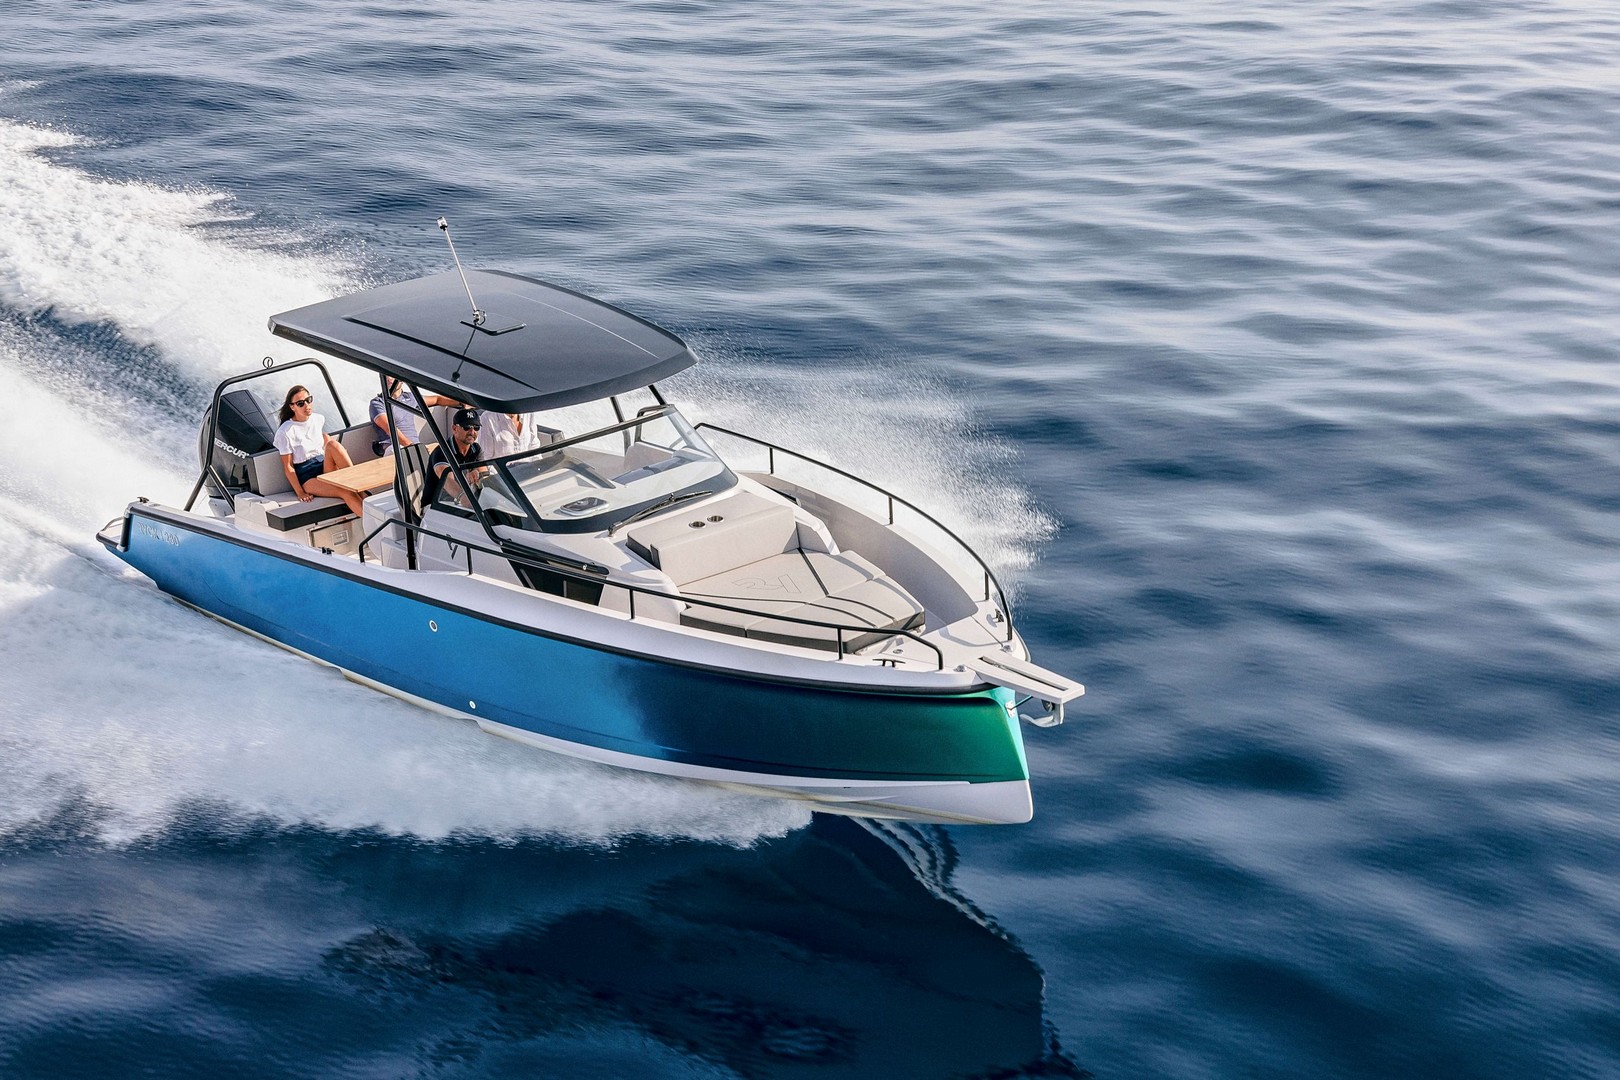 THE ALL-NEW RYCK 280